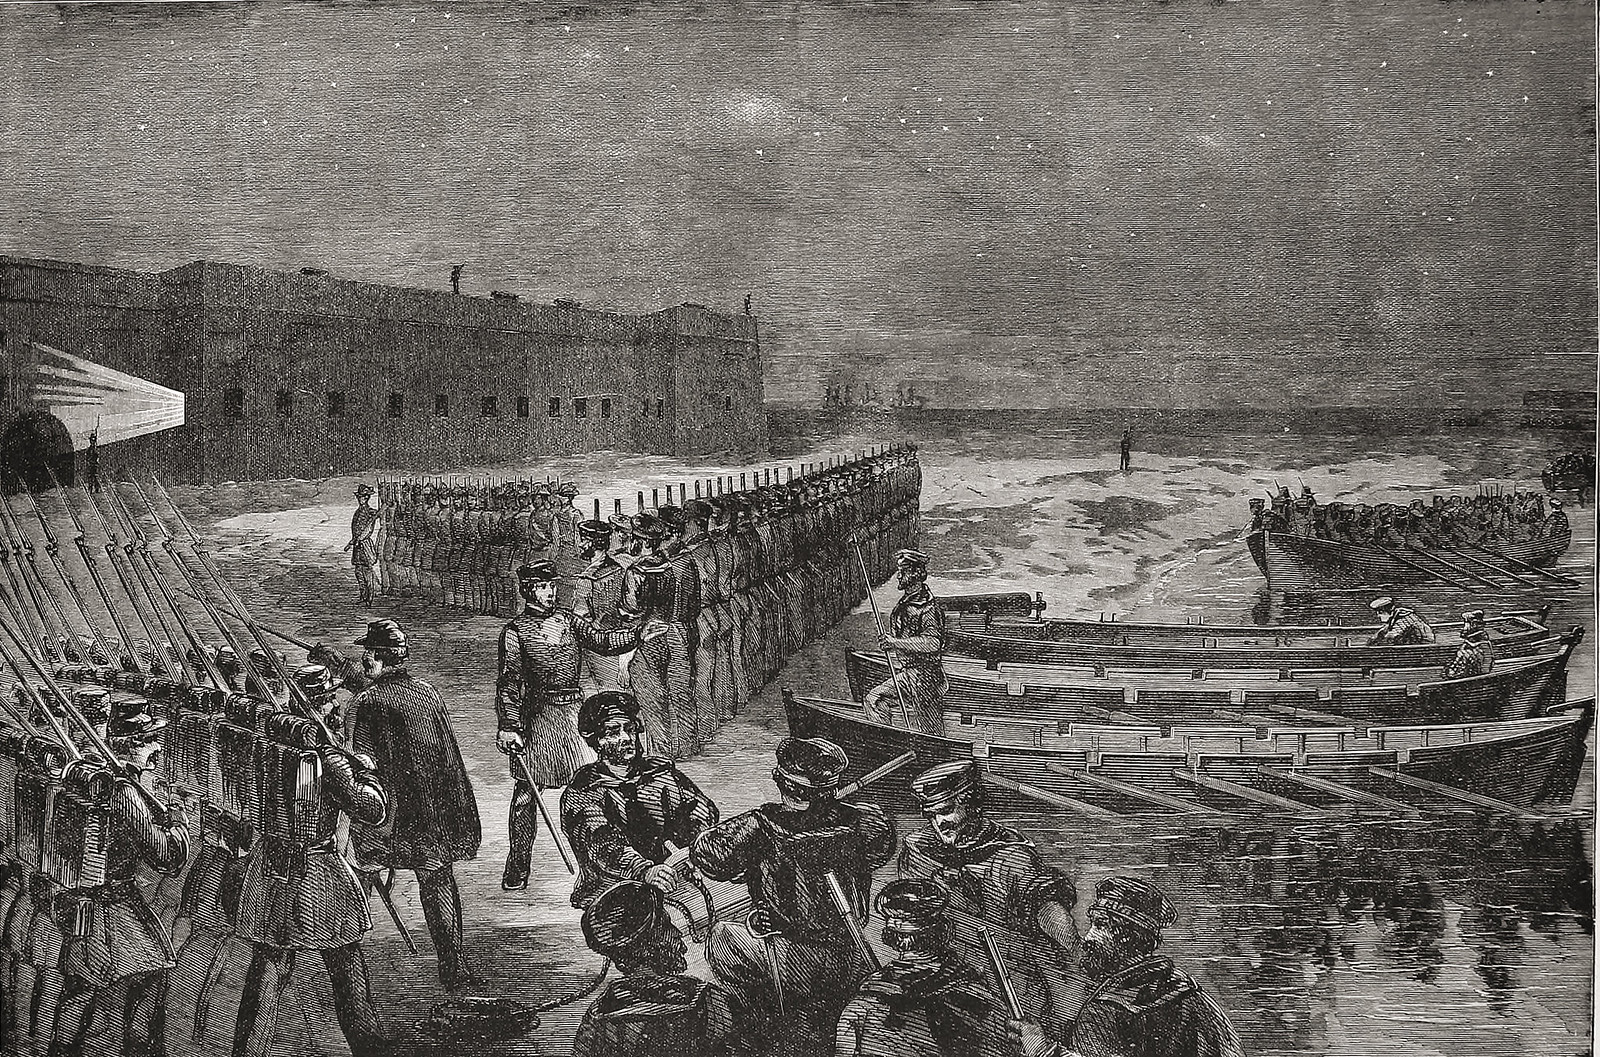 Re-Enforcements of Fort Pickens by Company A., First Artillery on Saturday Morning, April 13, 1861